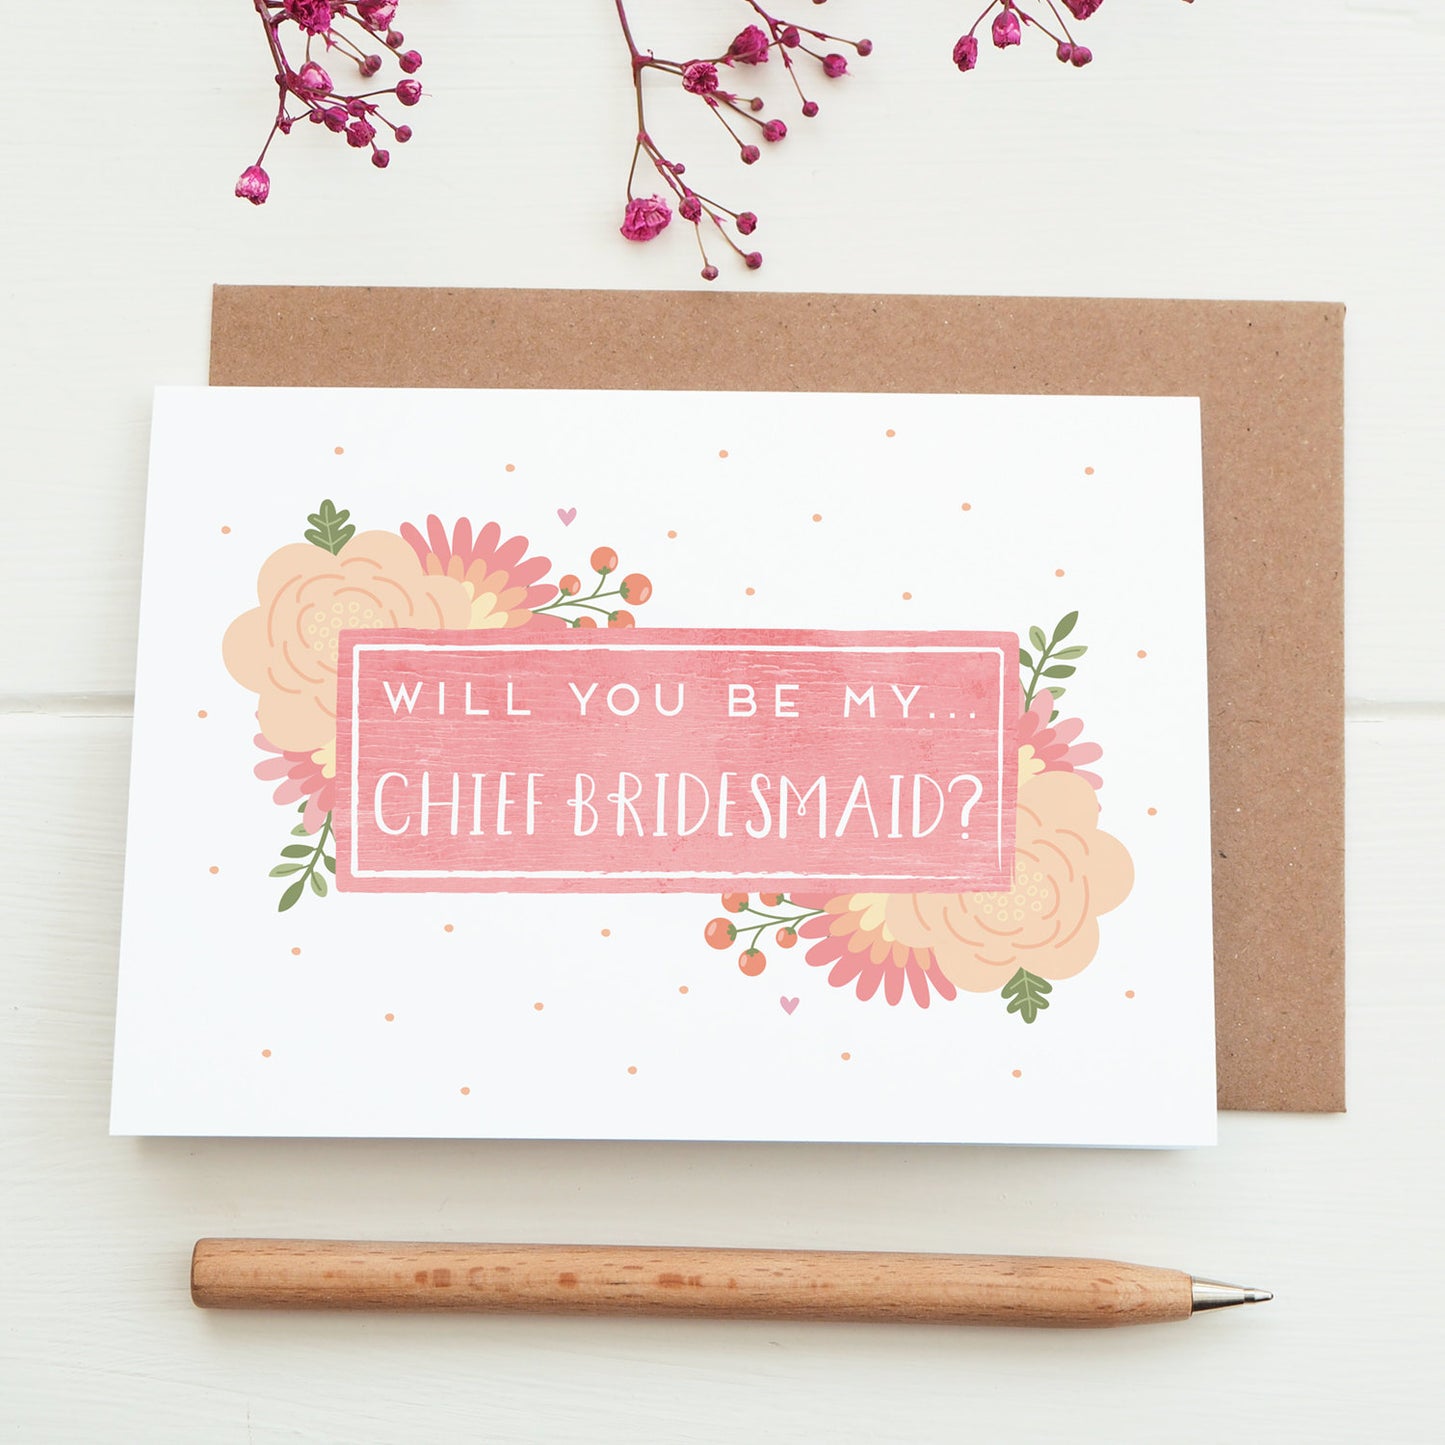 Will you be my chief bridesmaid card in pink